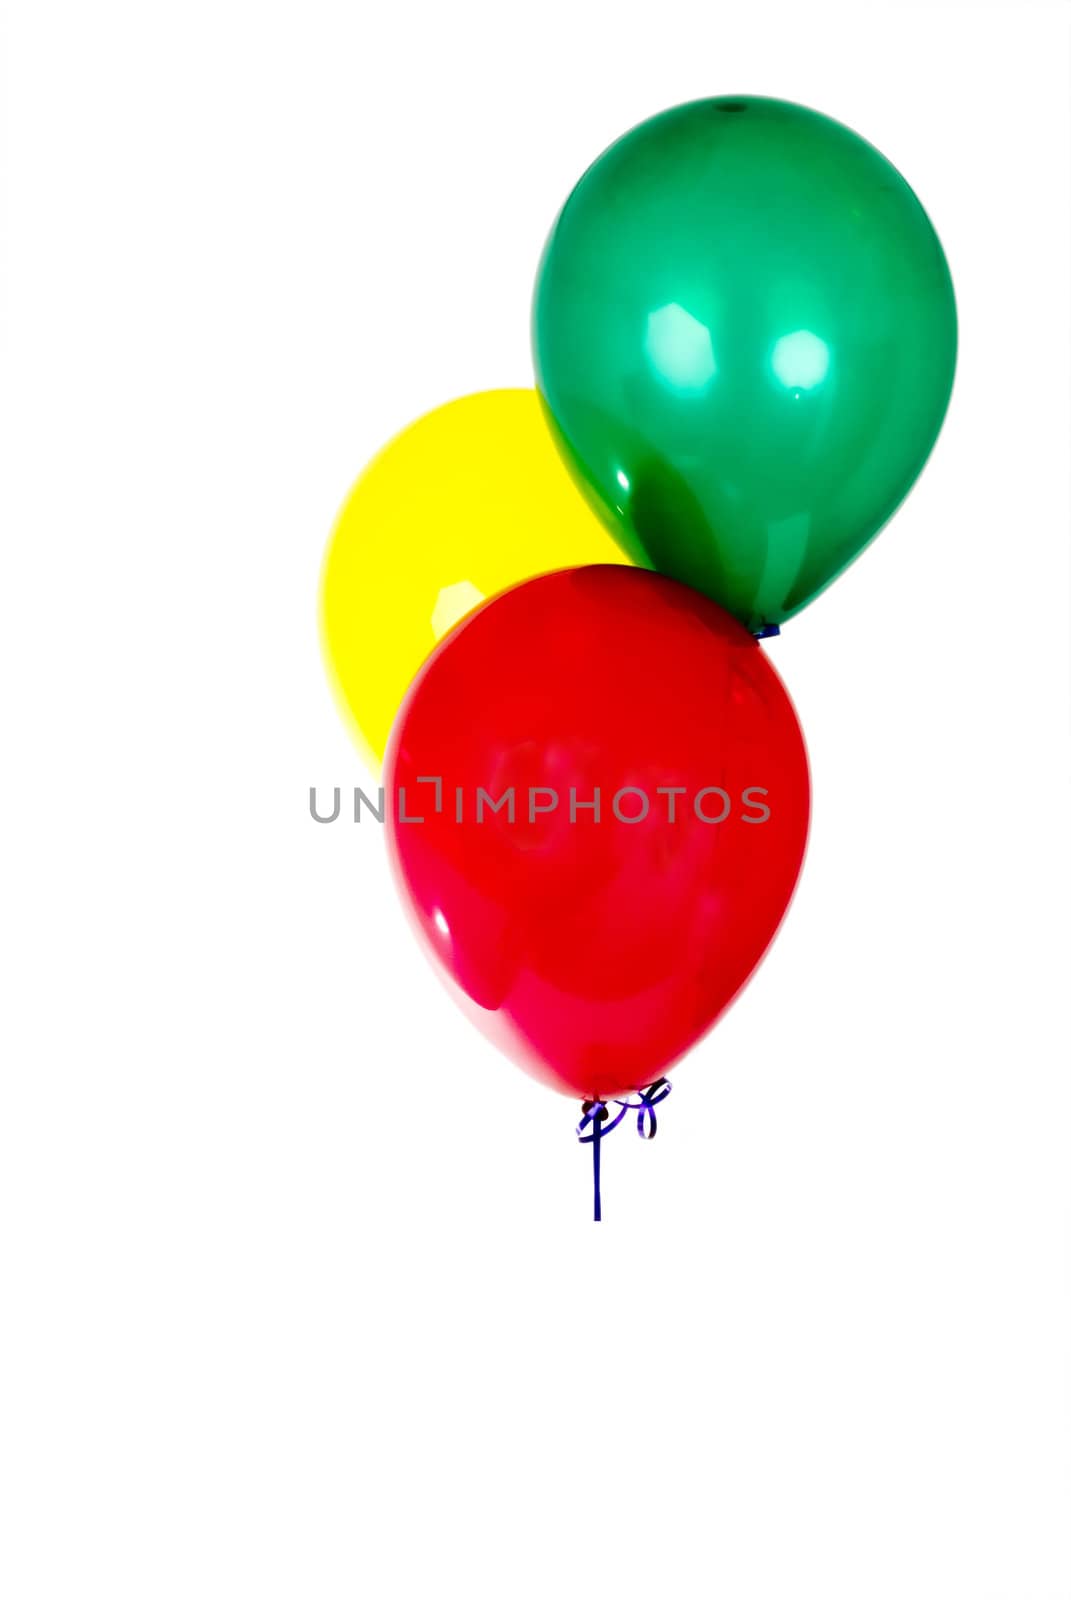 Balloons by eugenef